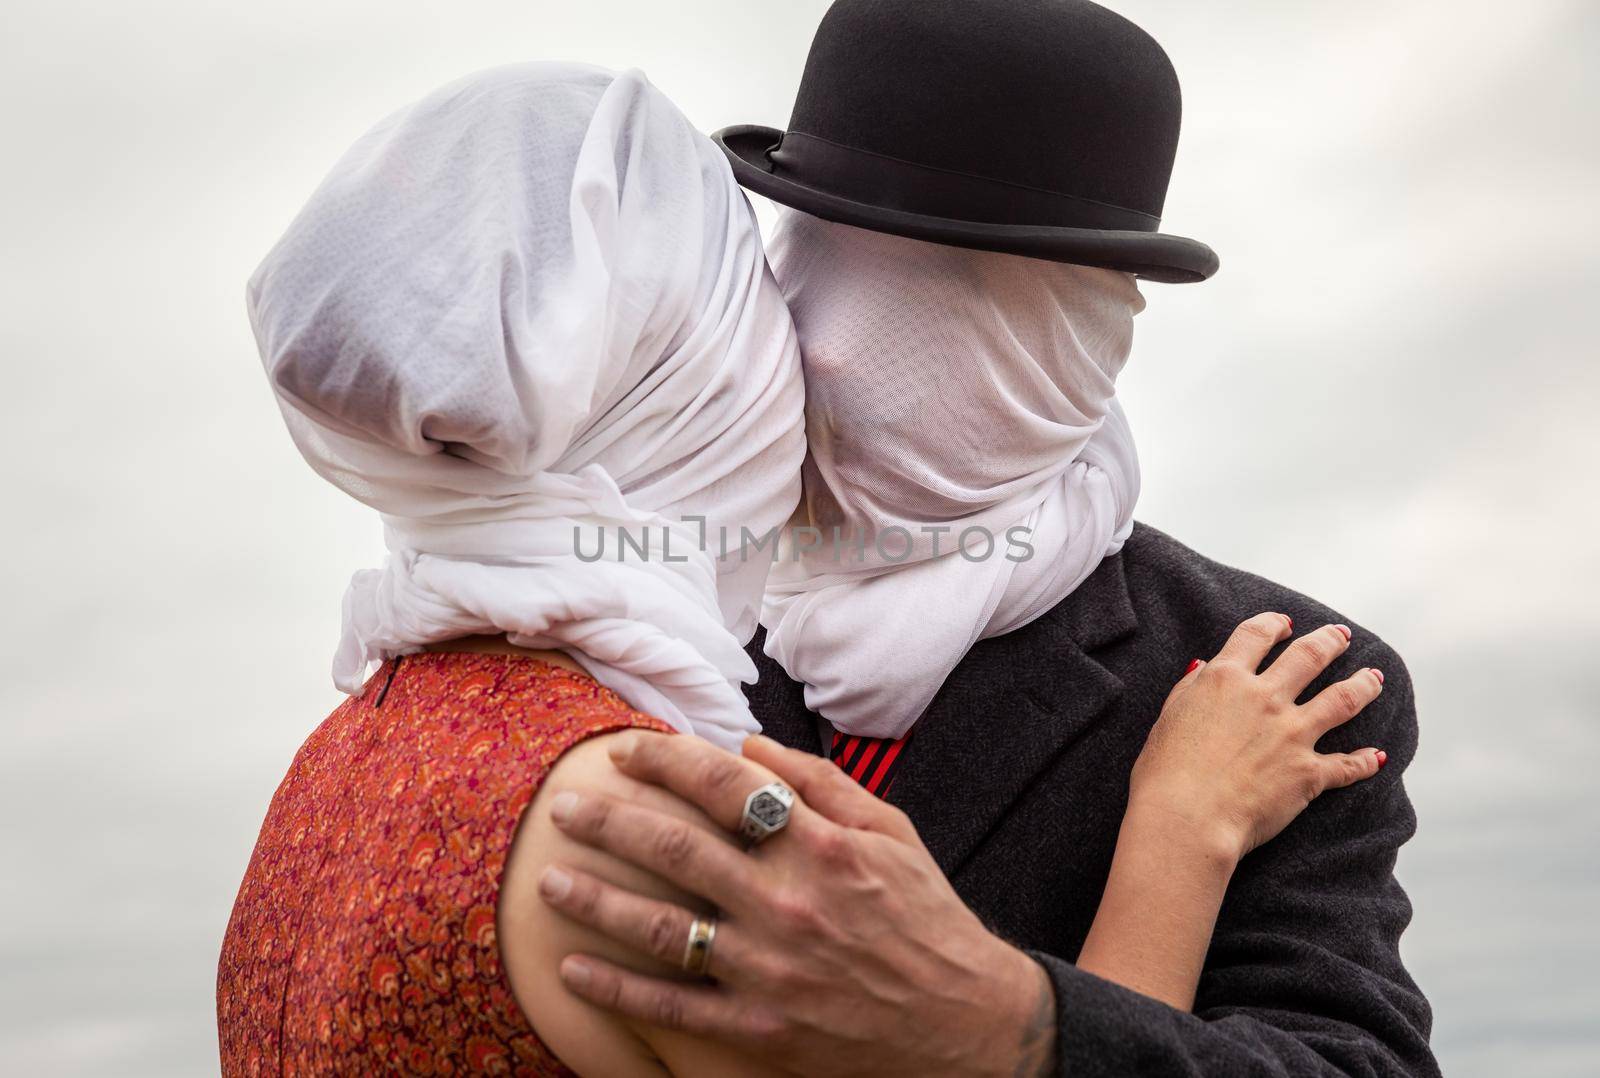 Faceless portrait of man kissing woman with white fabrics on their heads